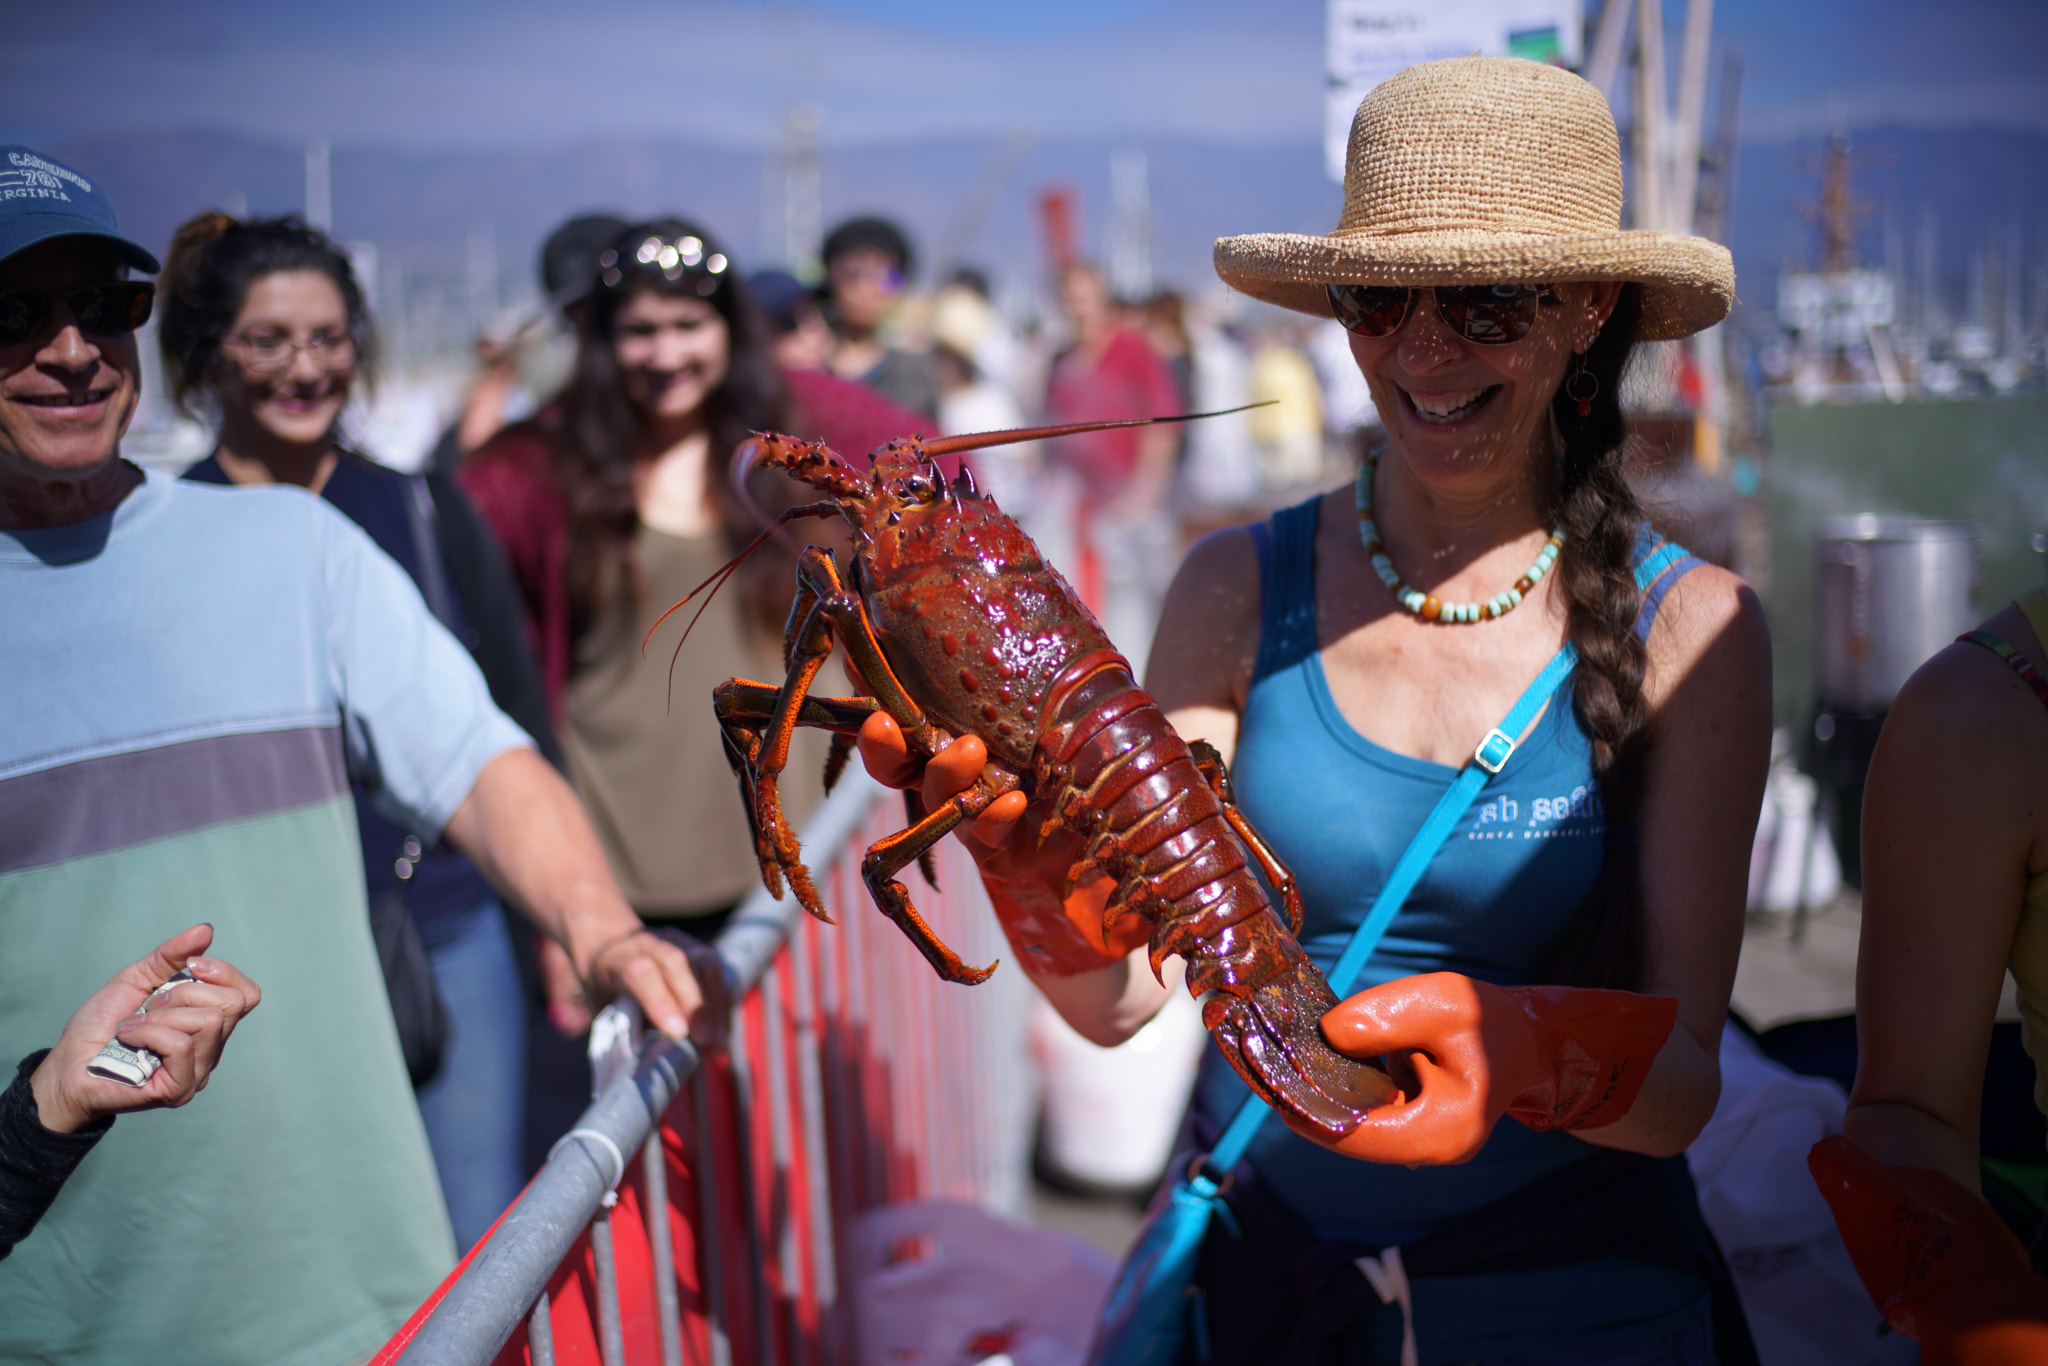 Sony a7R II sample photo. A huge lobster for dinner! photography